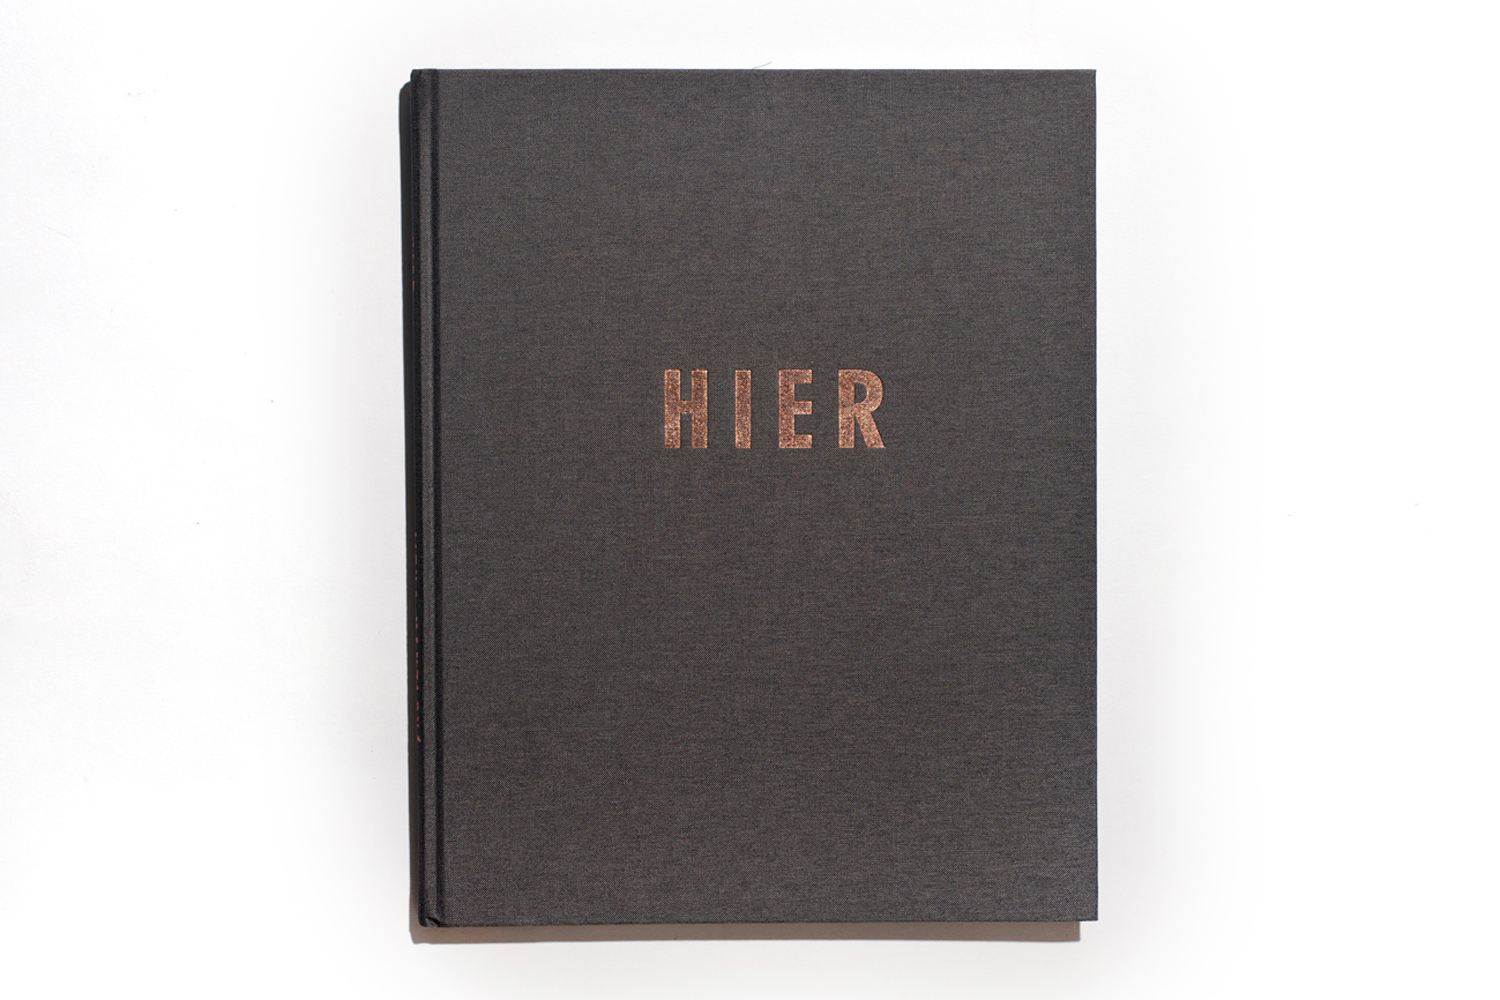 Hier by  Jitka Hanzlova, published by Koenig, selected by Michael Mack, founder of MACK books and MAPP digital editions.